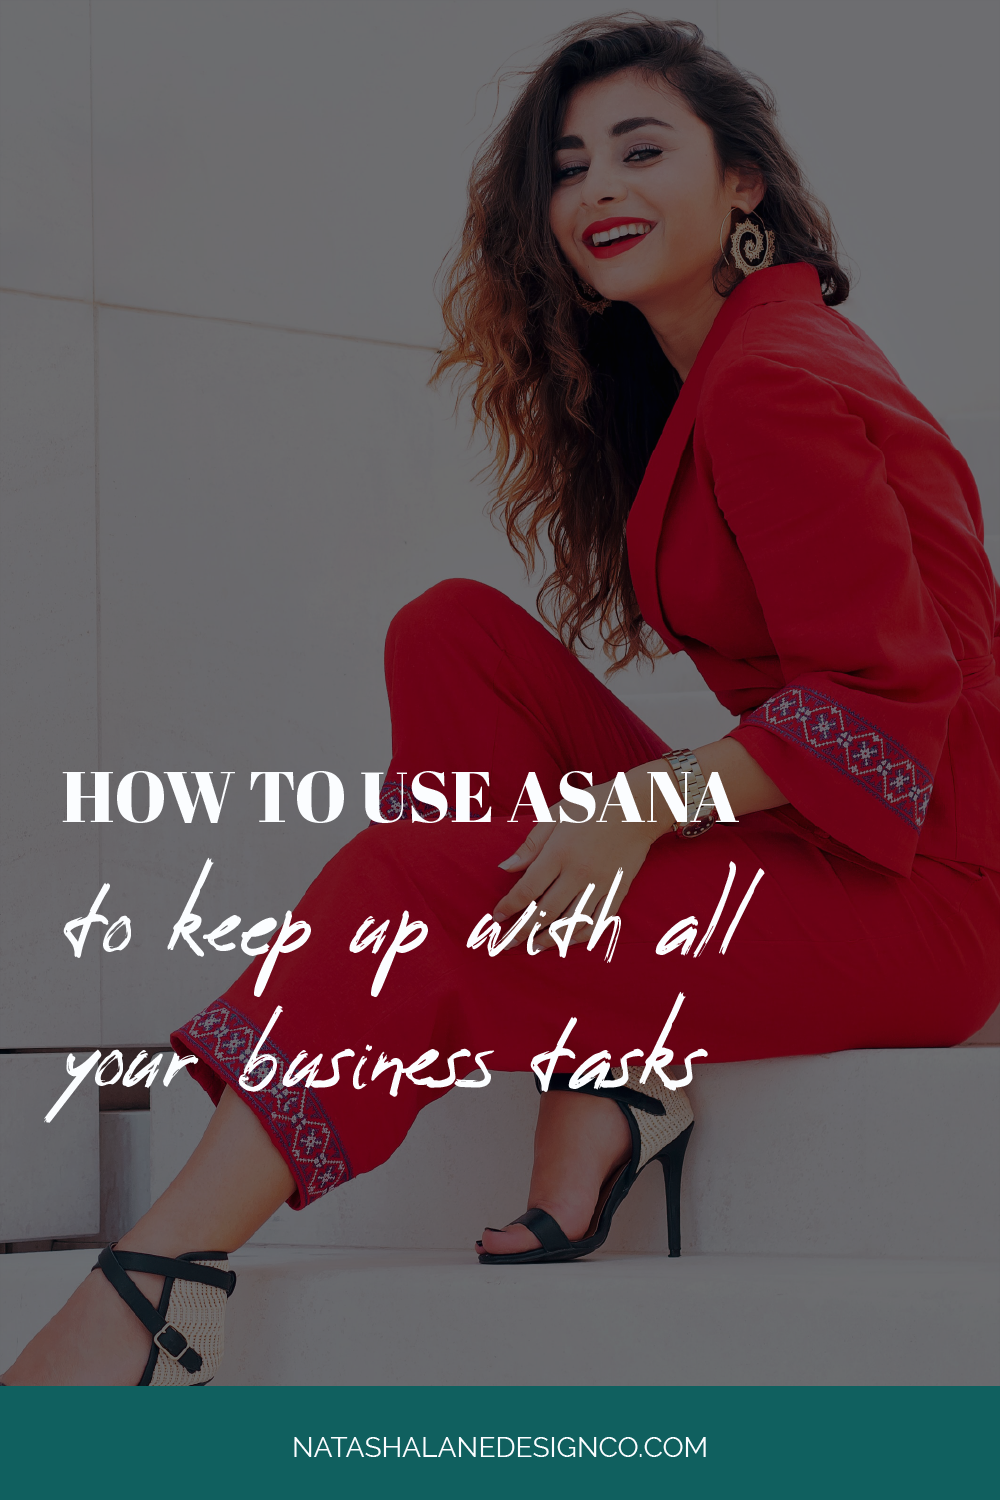 How to use asana to keep up with all your business tasks